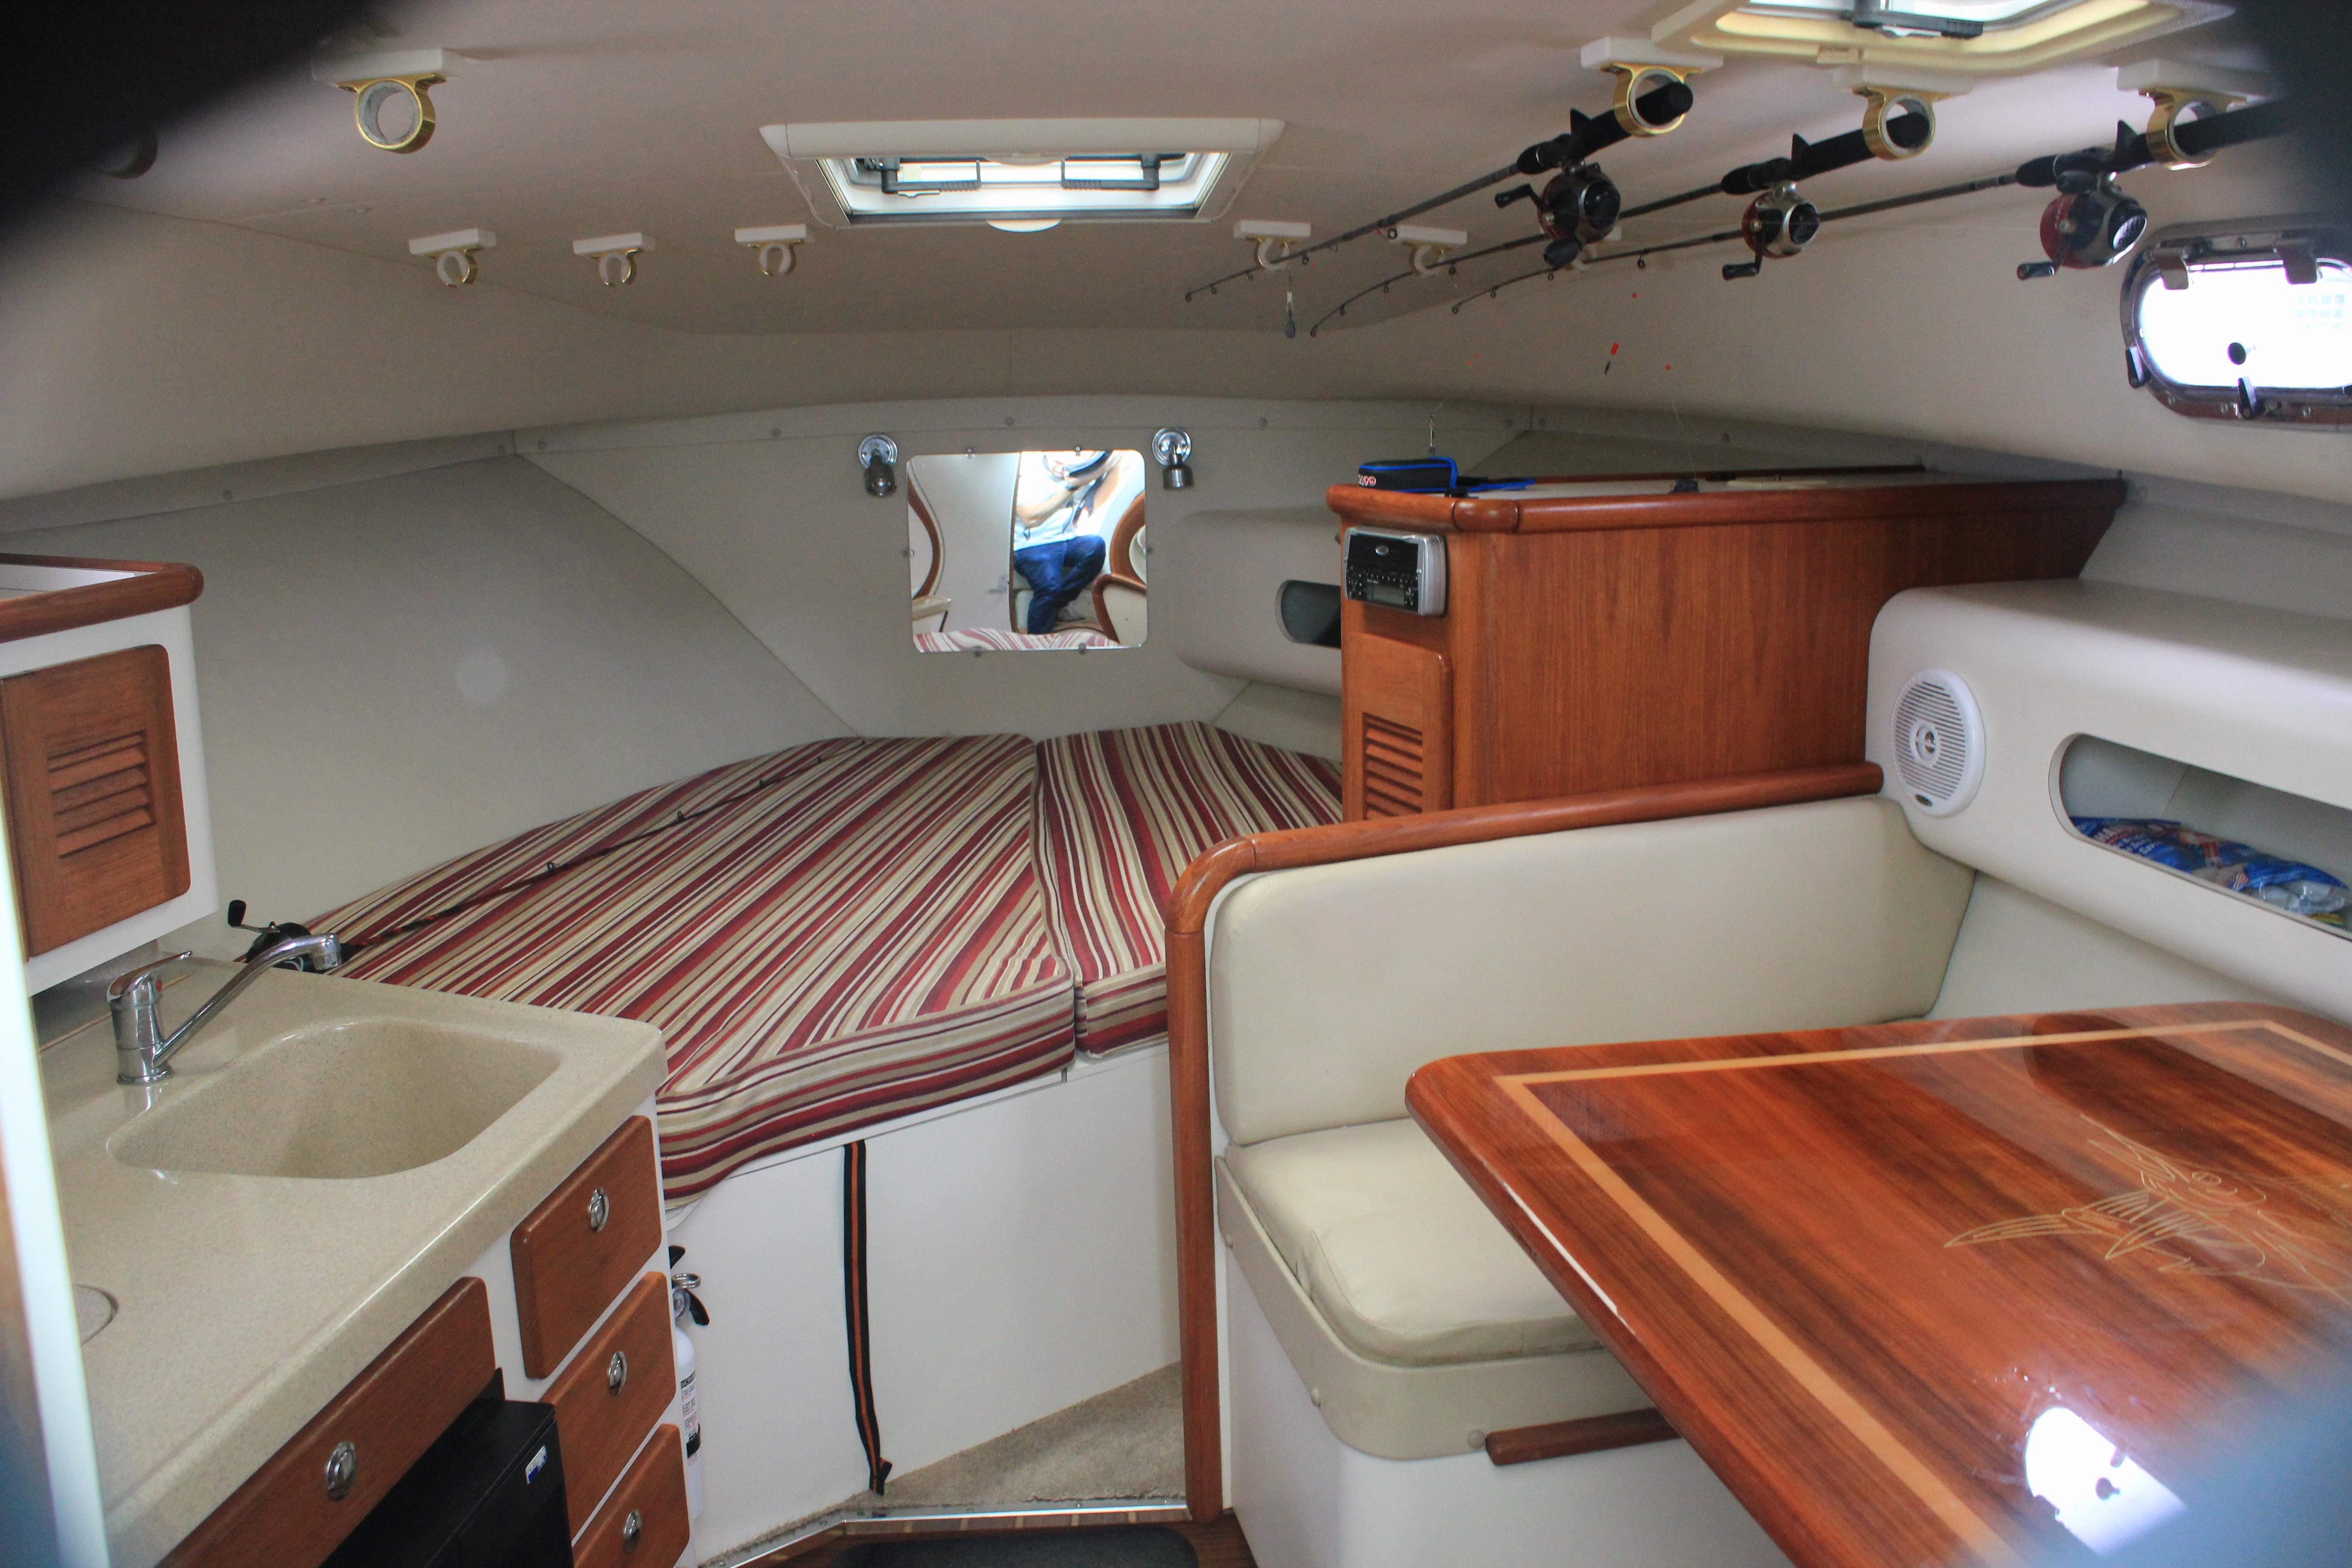 31 ft Pursuit 3100 Offshore Cabin, looking forward